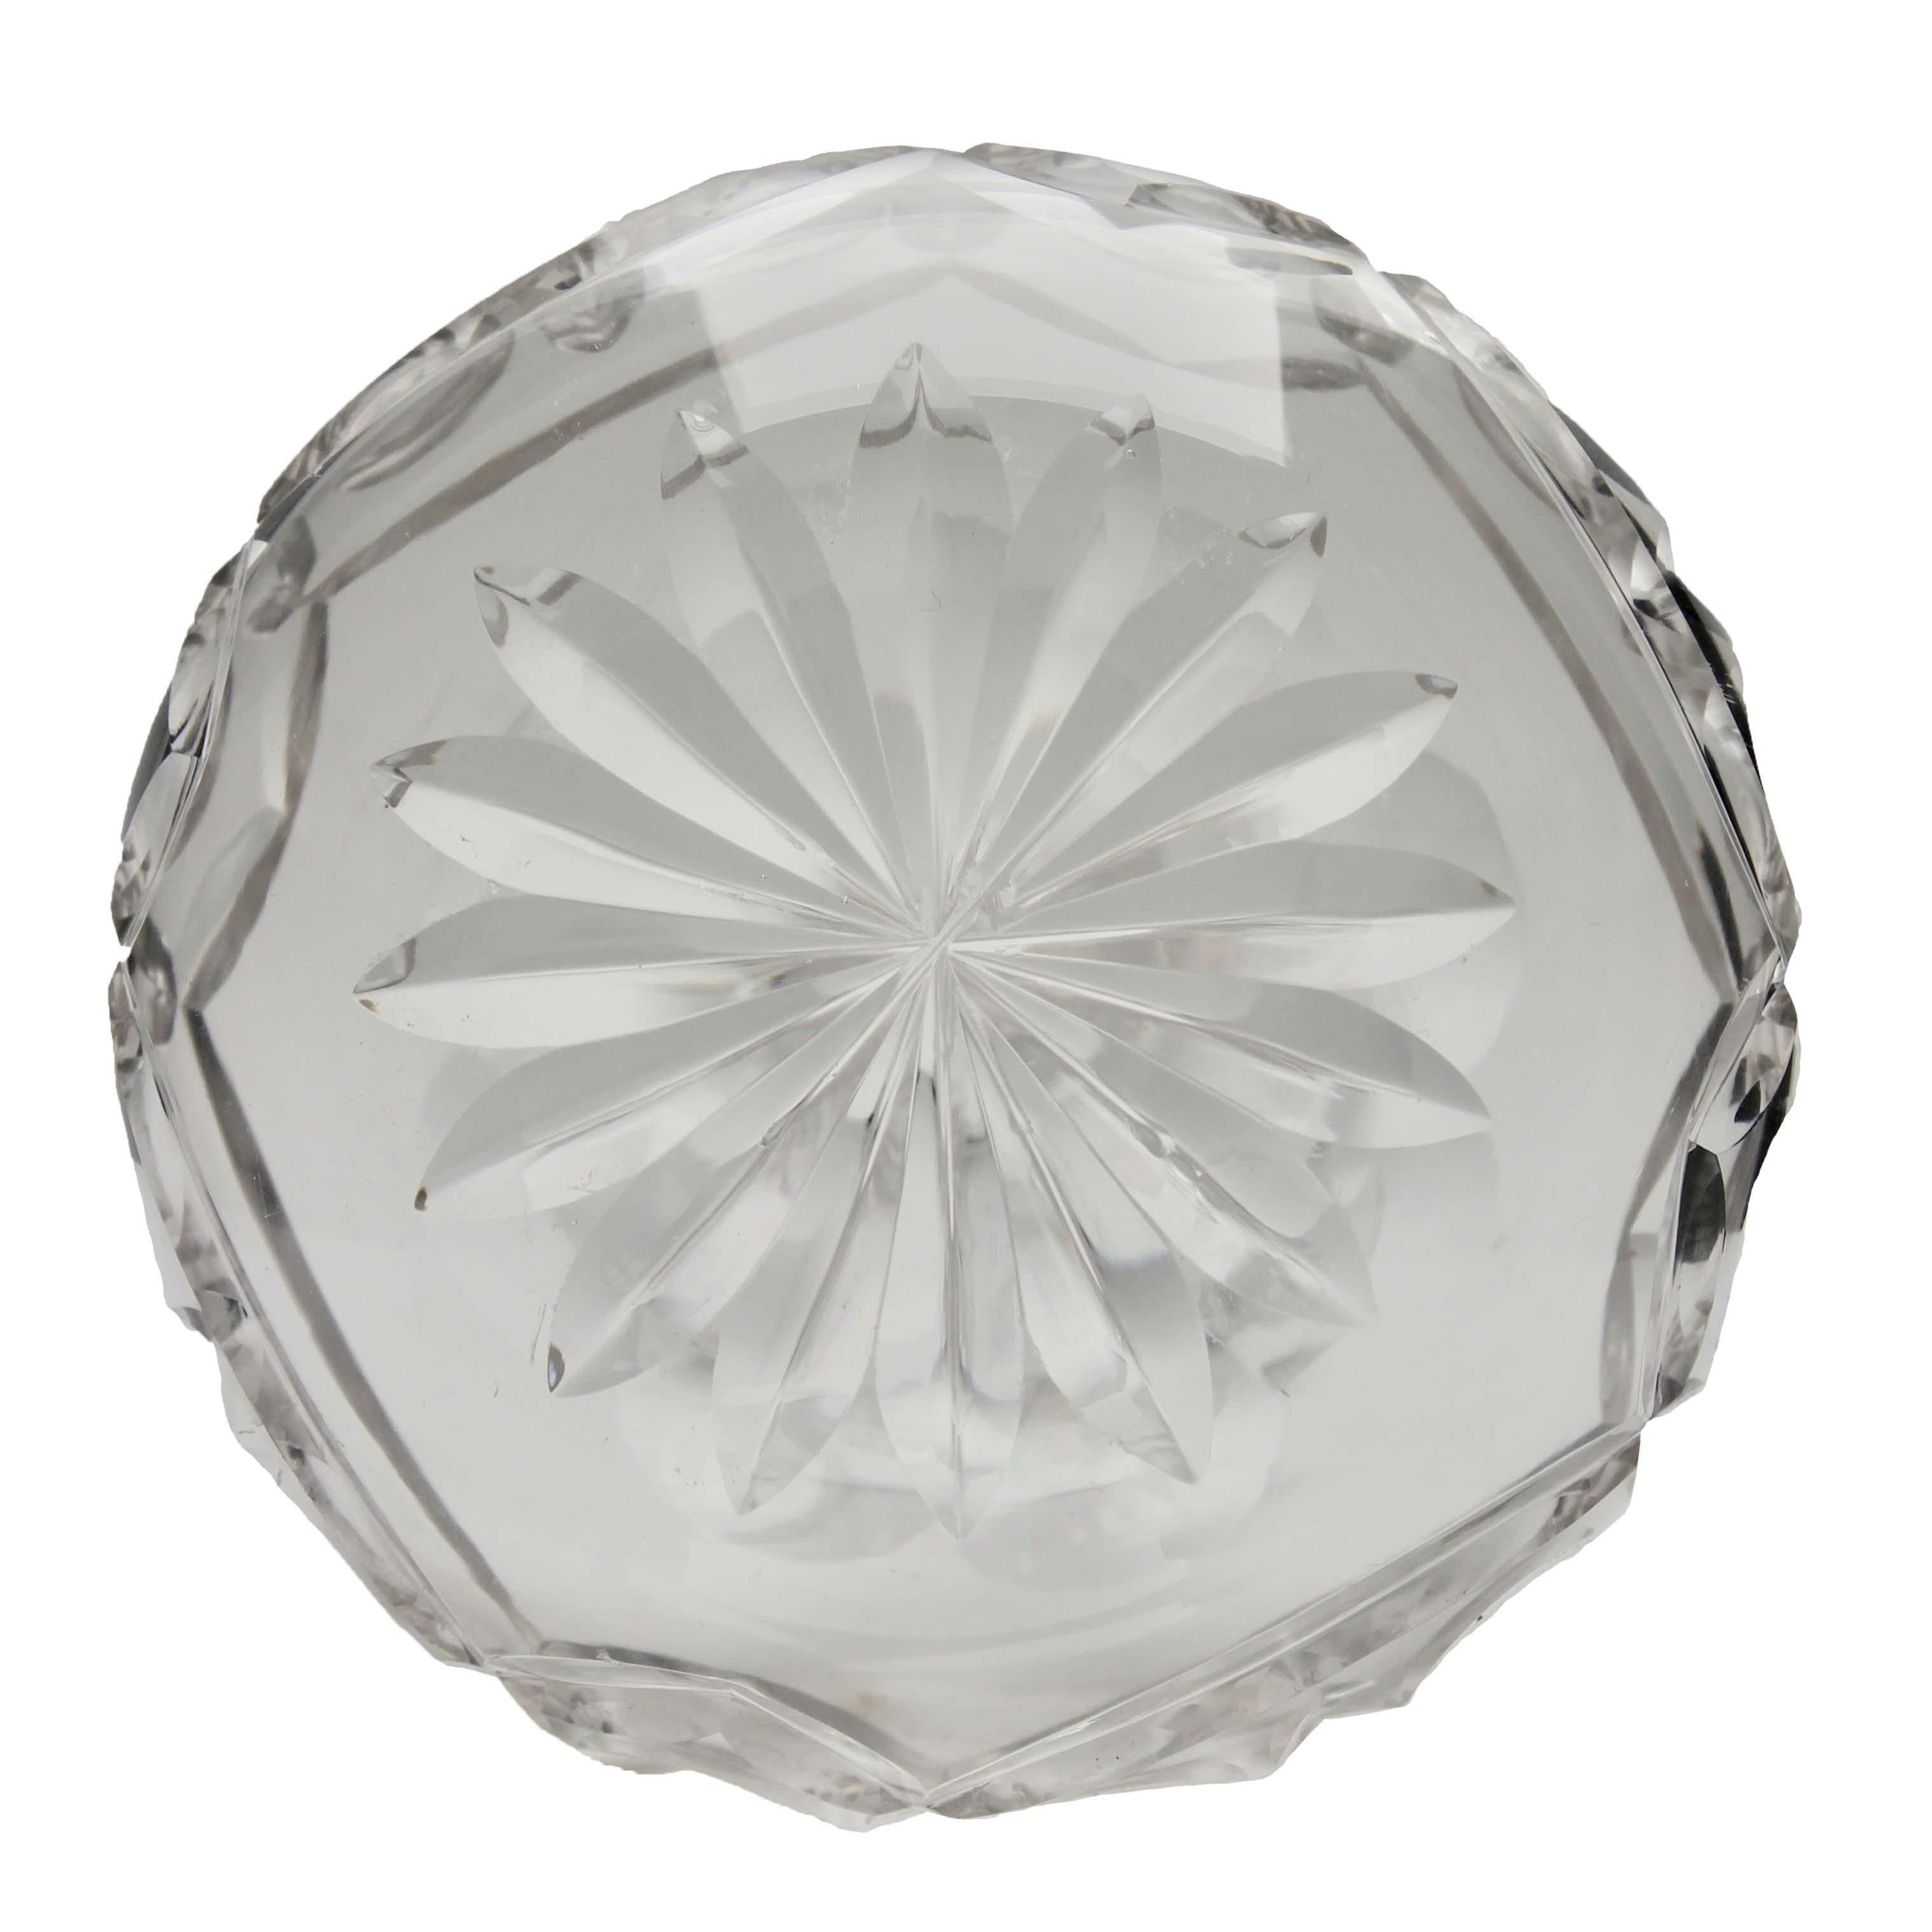 Faceted Val Saint Lambert Cut-Crystal Decanter 20th Century, Founded in 1826, Belgium For Sale